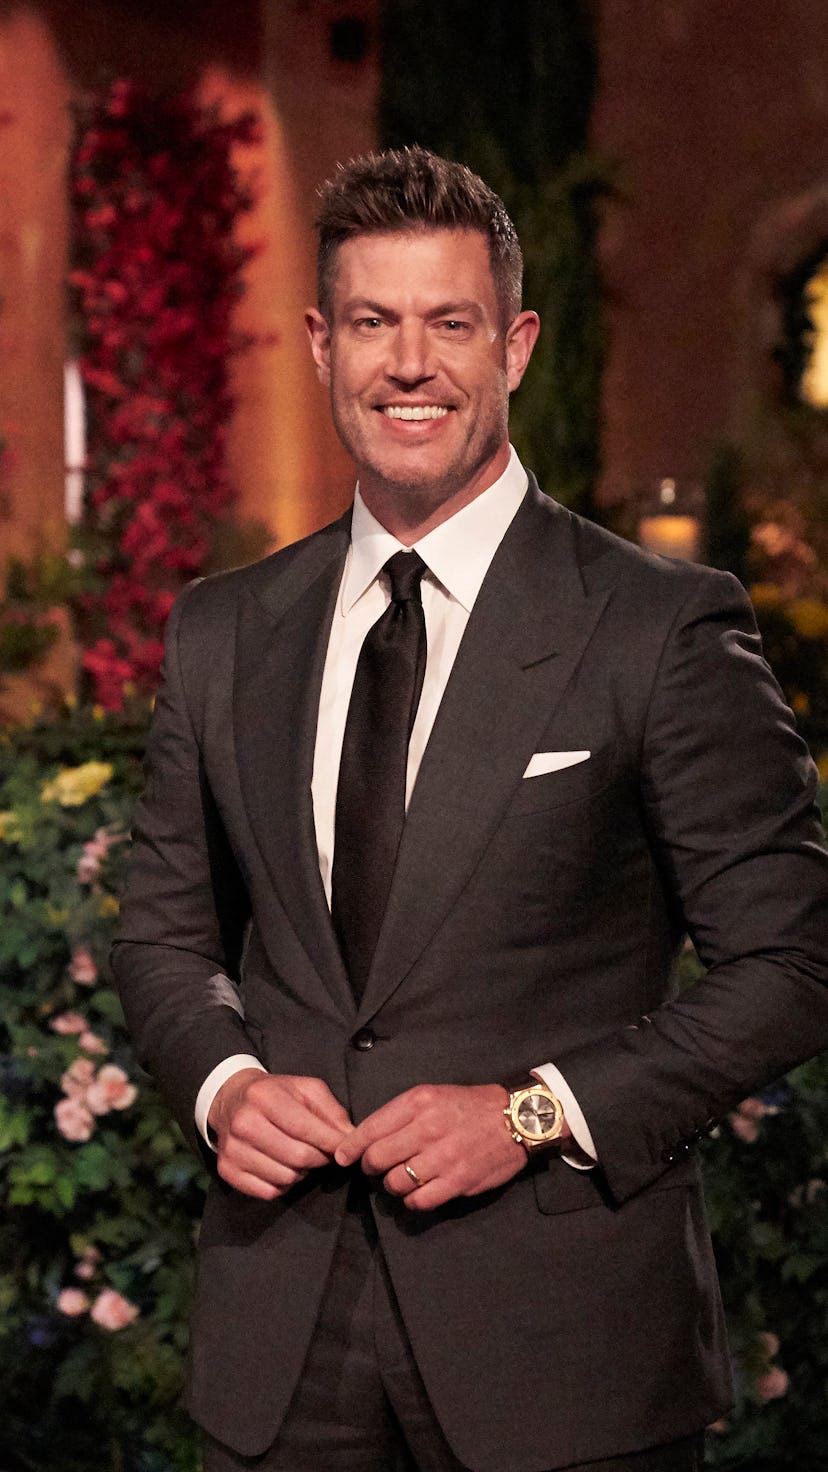 Jesse Palmer's 'Bachelor' casting ads are a hilarious new recruitment method for the franchise. Phot...